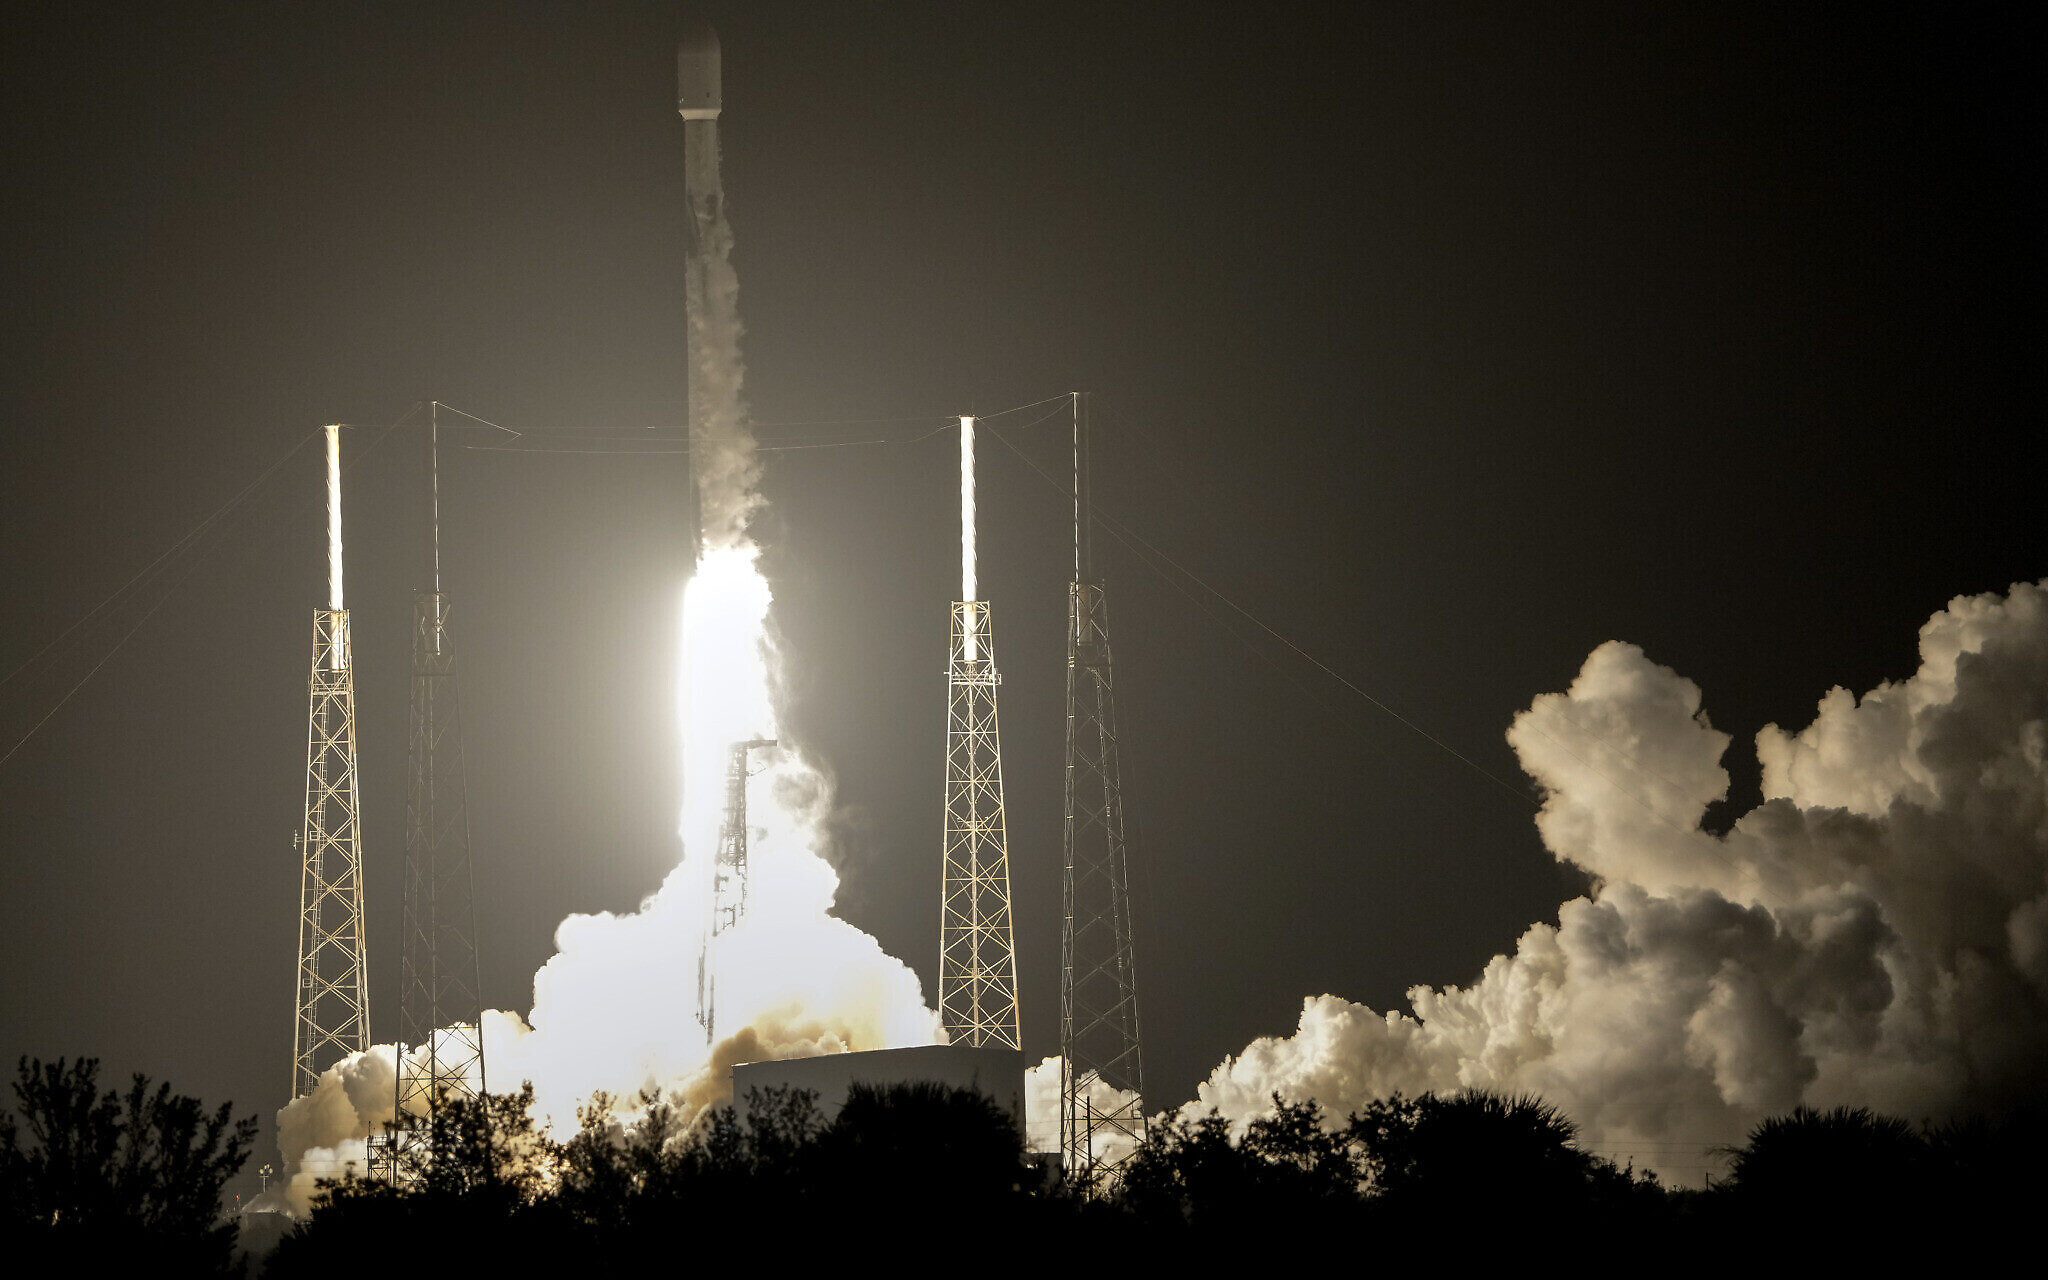 SpaceX Falcon 9 Rocket Carries into Space the 1st Ever Arab-built Lunar Spacecraft